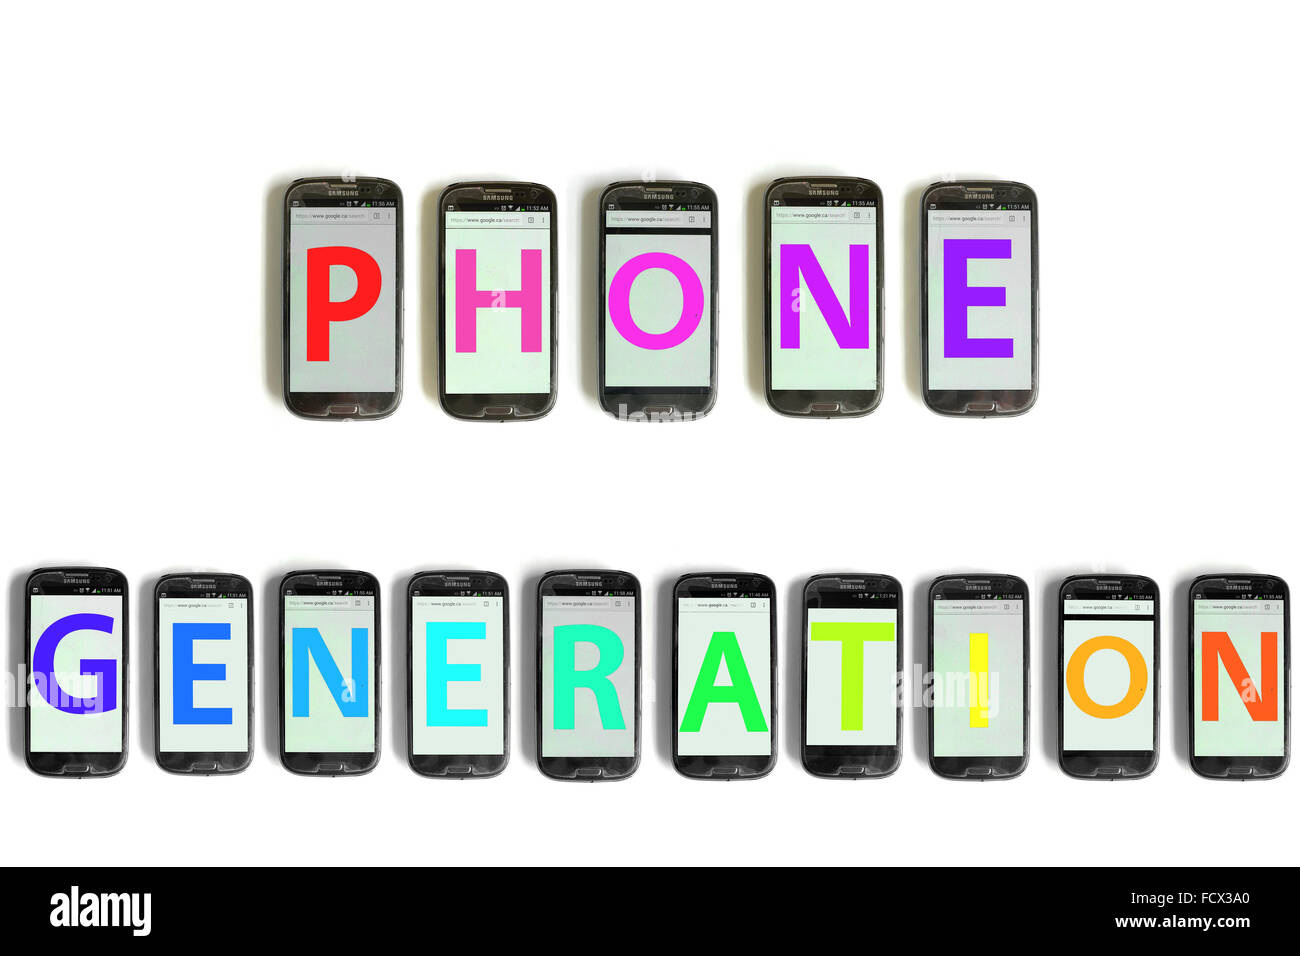 Phone Generation on the screens of smartphones photographed against a white background. Stock Photo